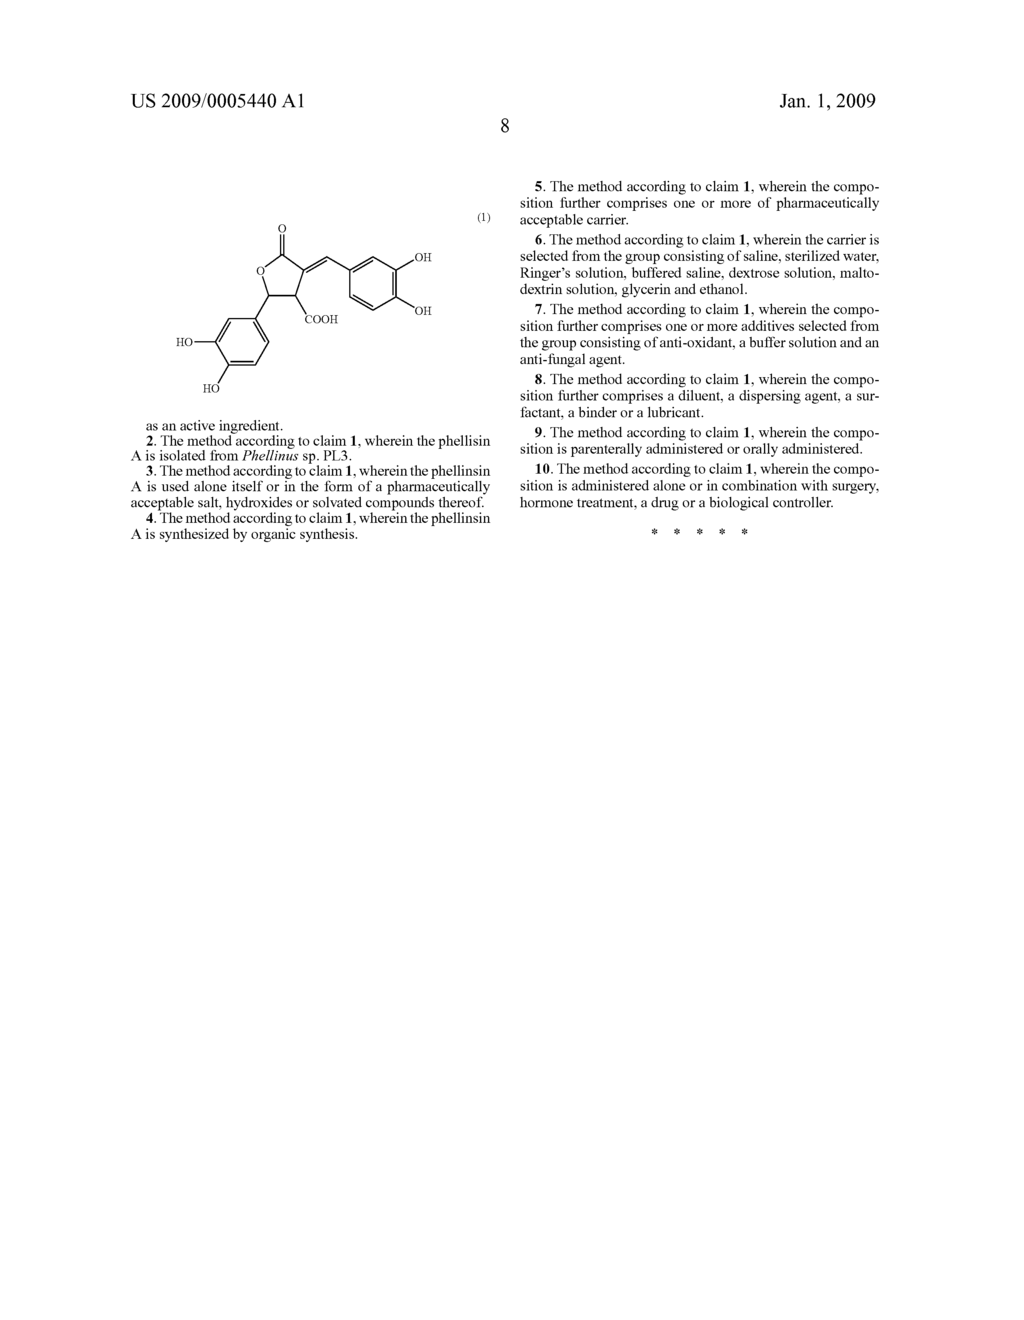 PHARMACEUTICAL COMPOSITION AND HEALTH FOOD COMPRISING EXTRACT OF PHELLINUS SP.PL 3 OR PHELLINSIN A ISOLATED FROM THE SAME AS AN EFFECTIVE COMPONENT FOR PREVENTION AND TREATMENT OF CARDIOVASCULAR DISEASE - diagram, schematic, and image 10